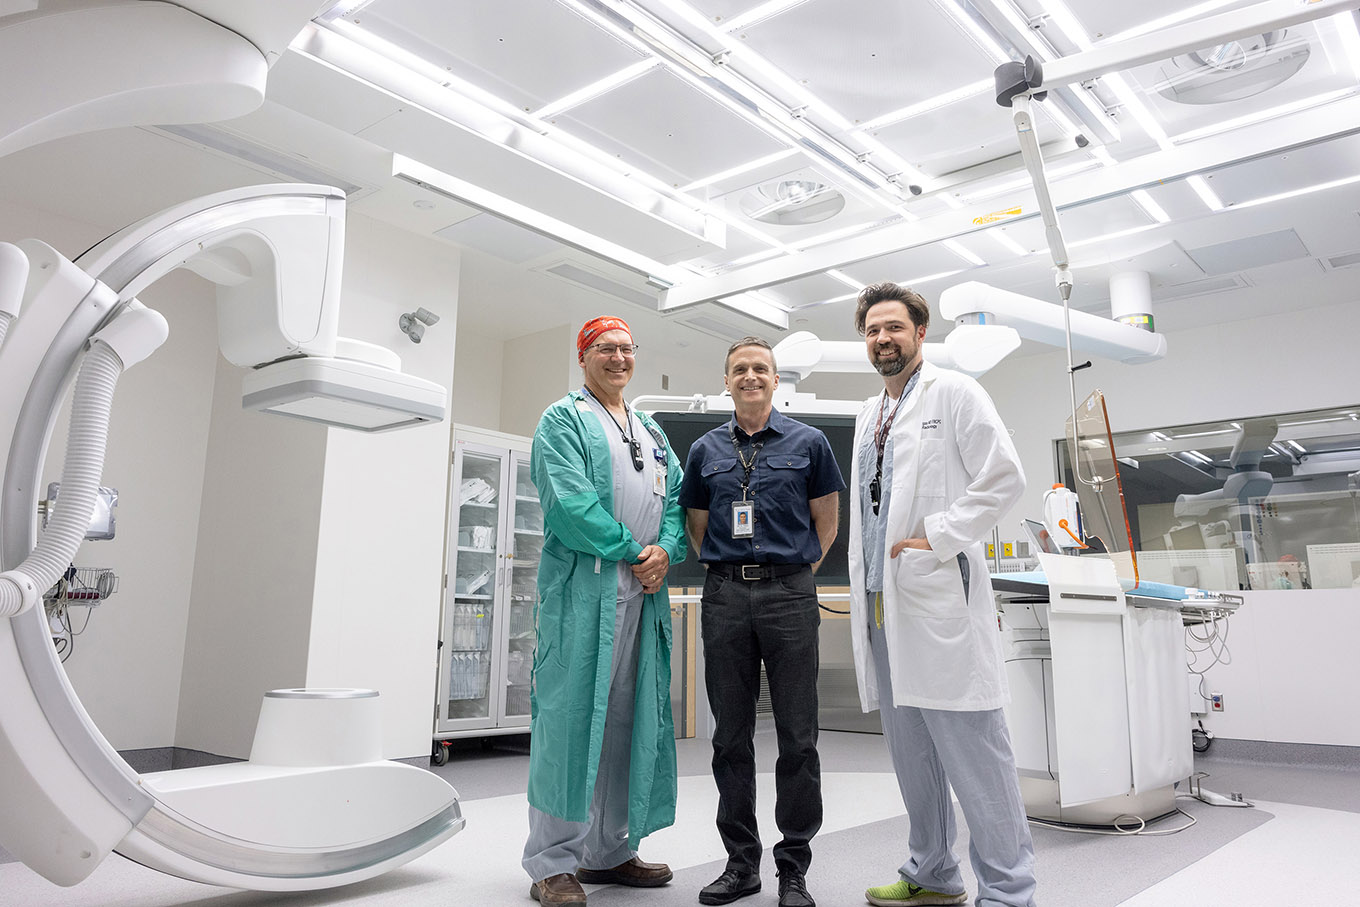 New interventional radiology suite opens at Kelowna General Hospital